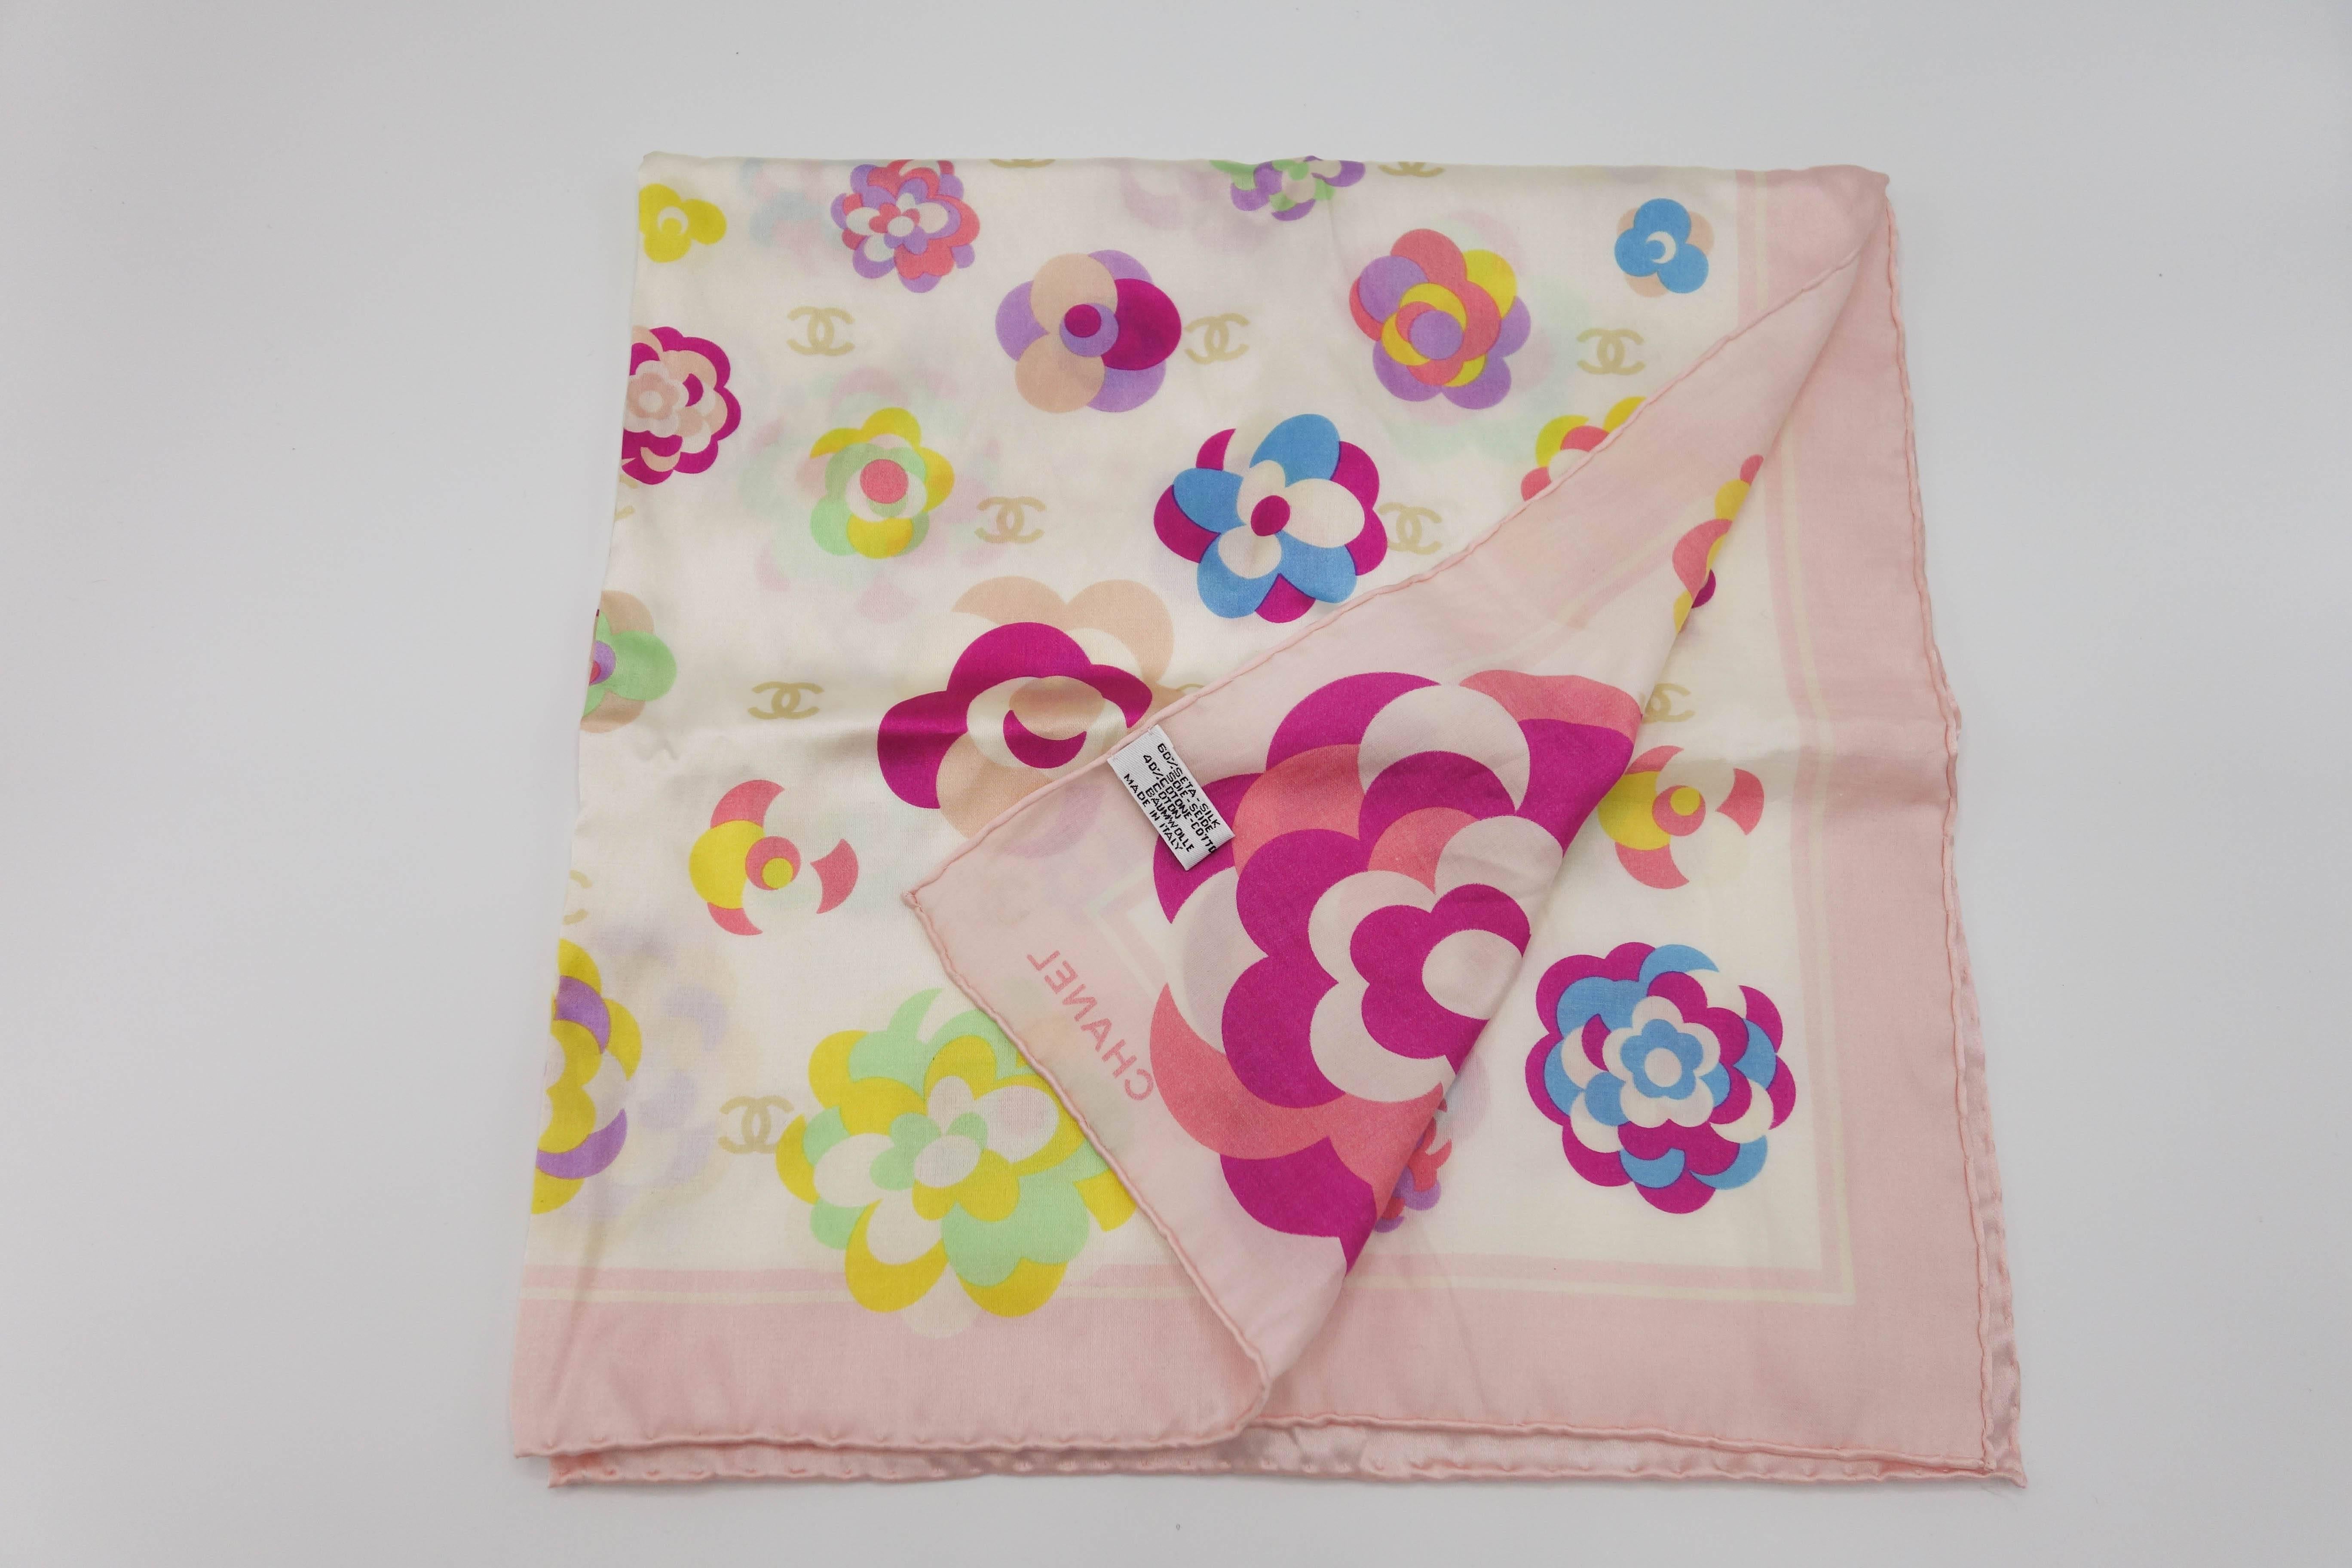 Brand new Chanel flower patterned multicolored scarf
Size: 26 in x 26 in
Material: 60% Silk 40% Cotton
Comes with original Box
